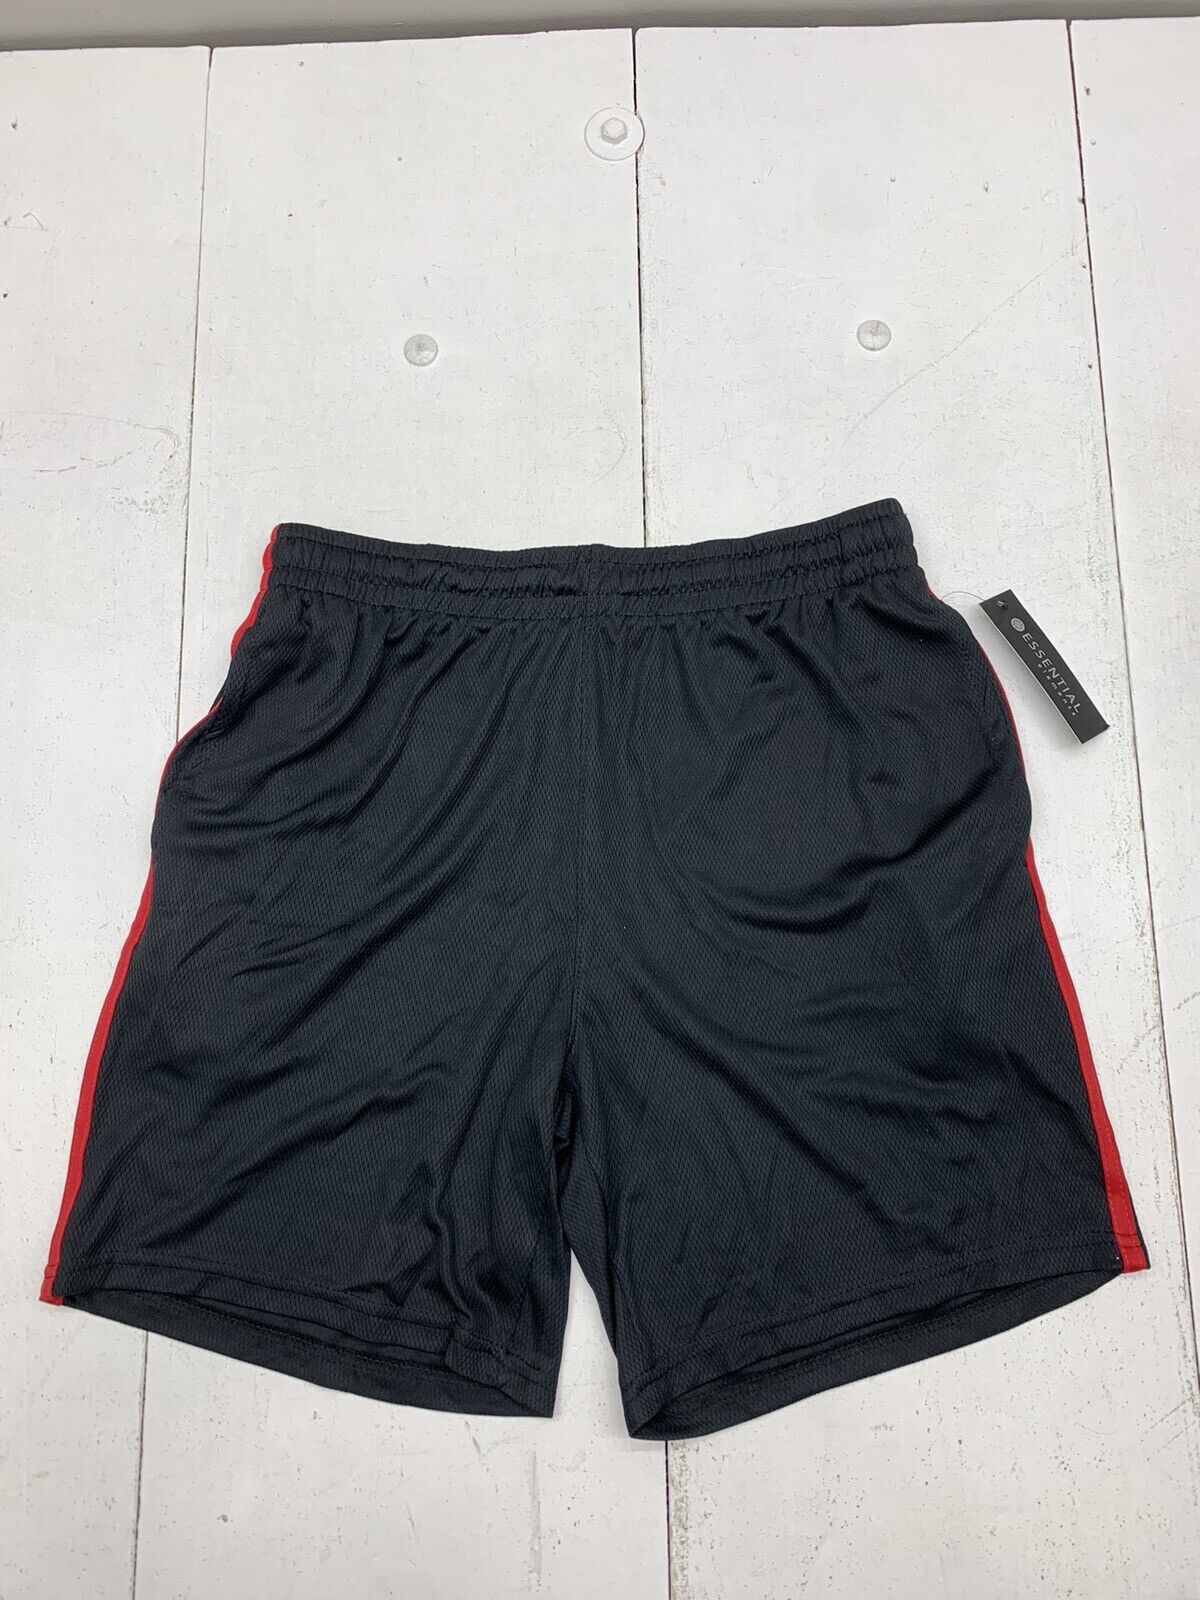 Essential Elements Mens Black Red Mesh Athletic Shorts Size Large